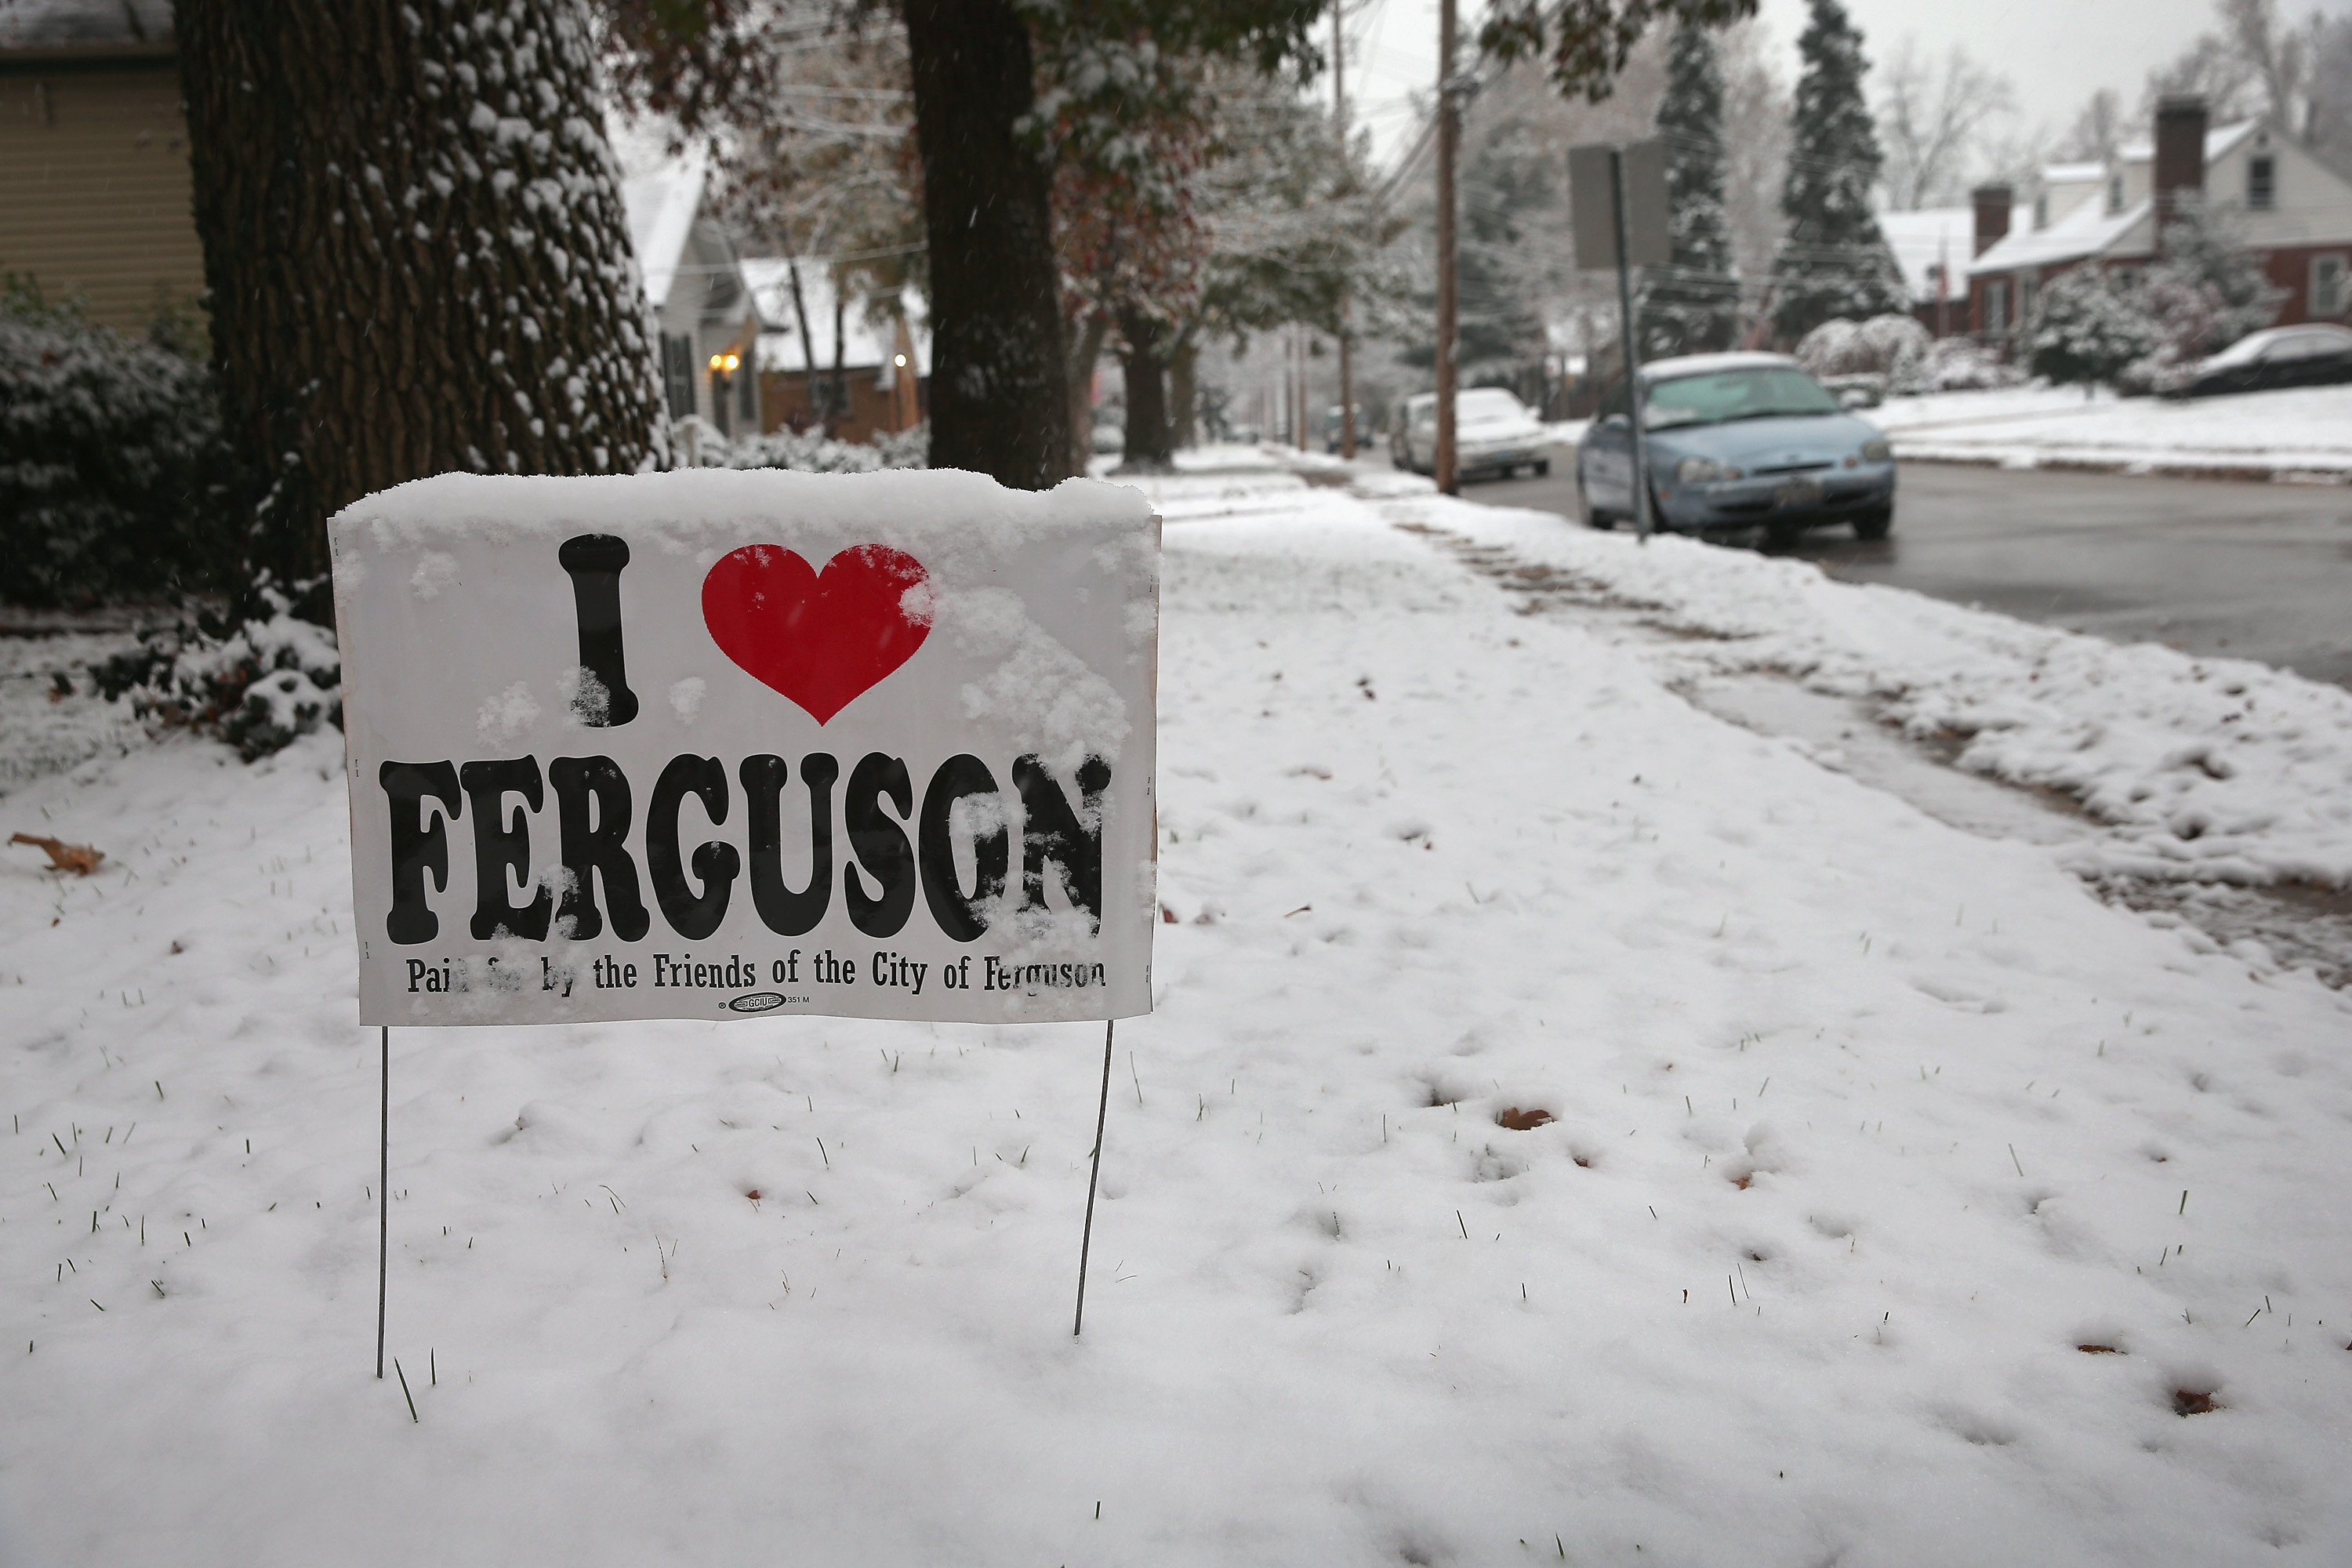 Snow covers a yard sign placed outside a home near the police station on Nov. 16, 2014 in Ferguson, Missouri. (Scott Olson—Getty Images)